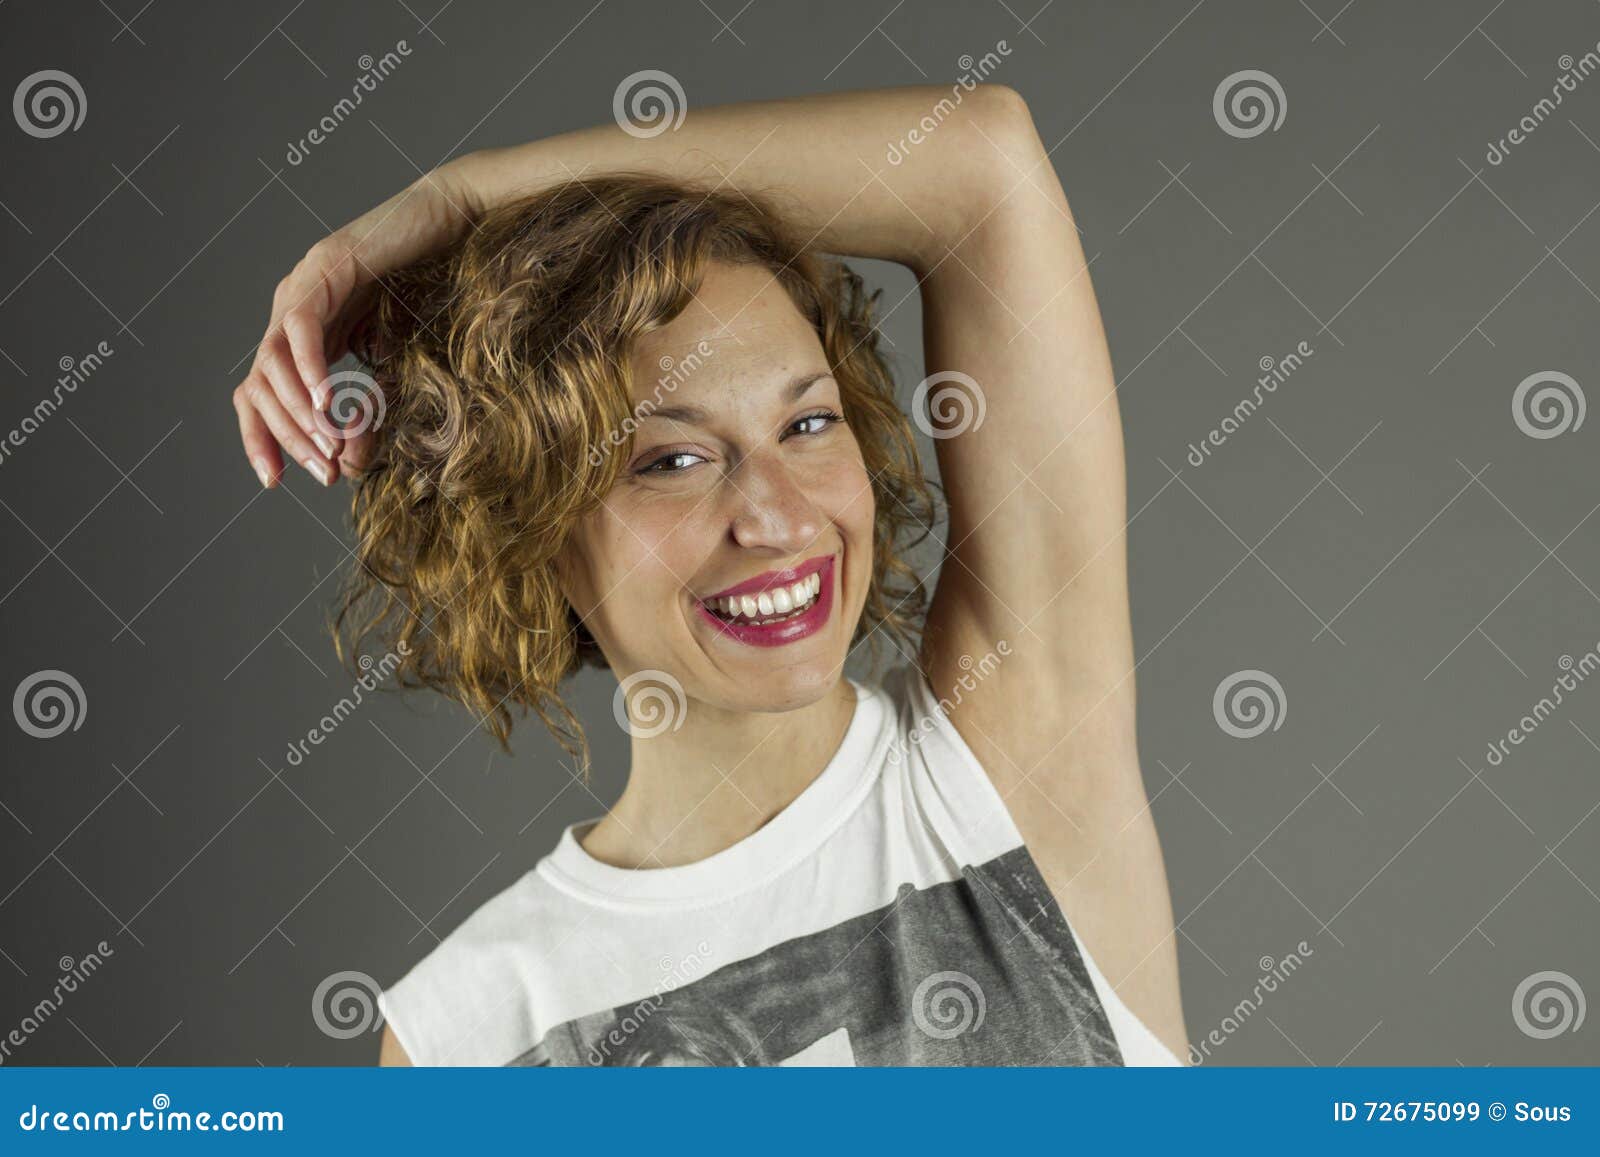 Close Up Portrait Of Beautiful Woman With A Huge Smile Stock Image Image Of Pretty Fashion 